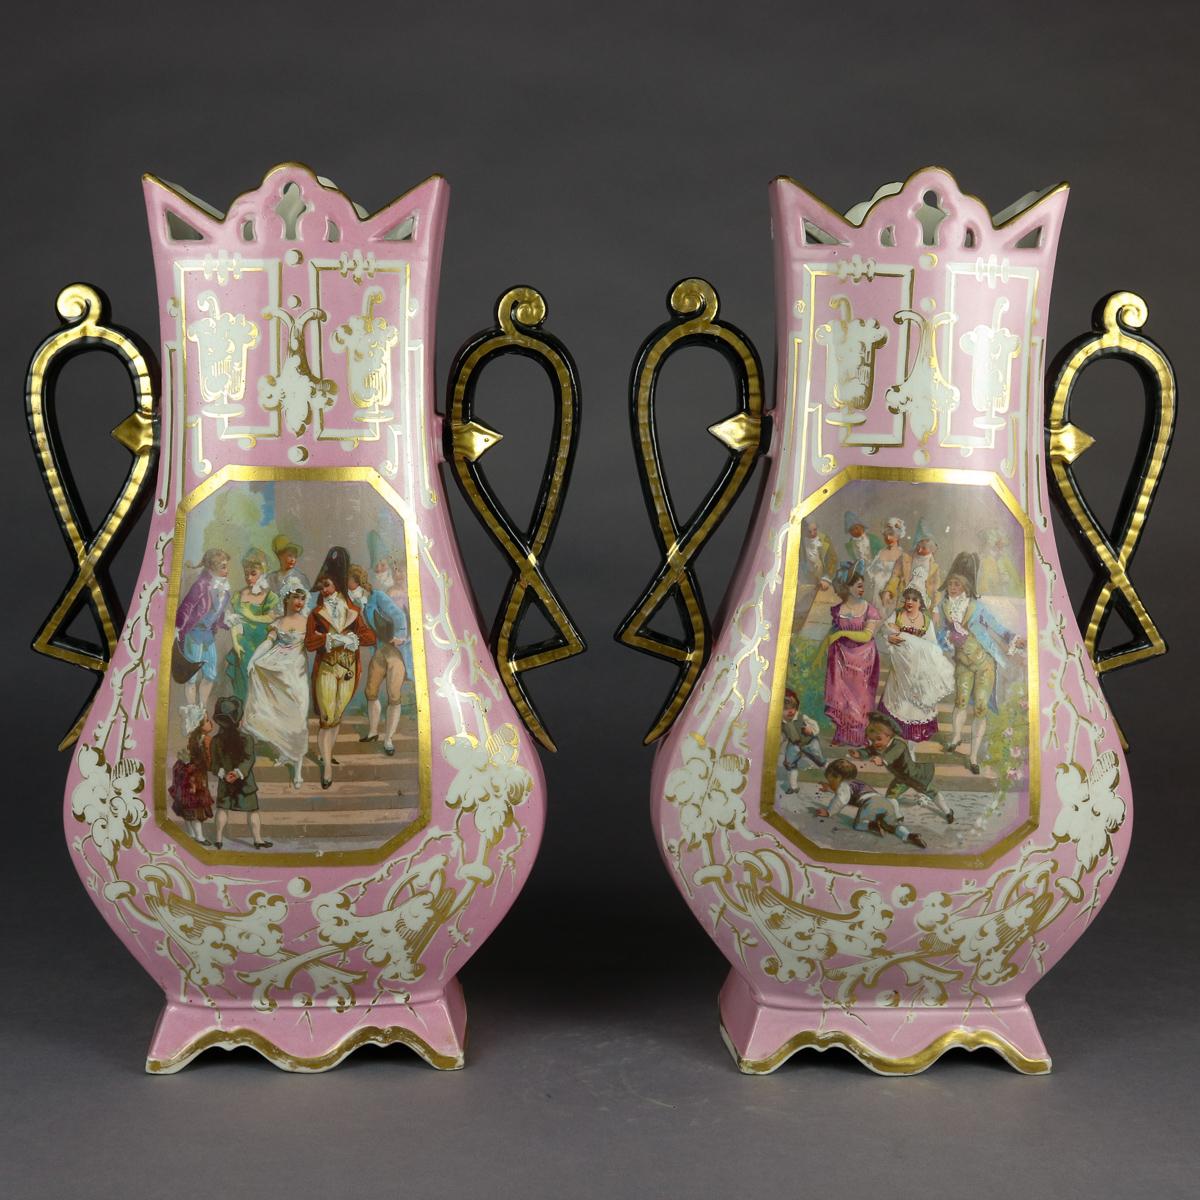 Hand-Painted Pair of Monumental Antique French Figural Porcelain Pictorial Old Paris Vases